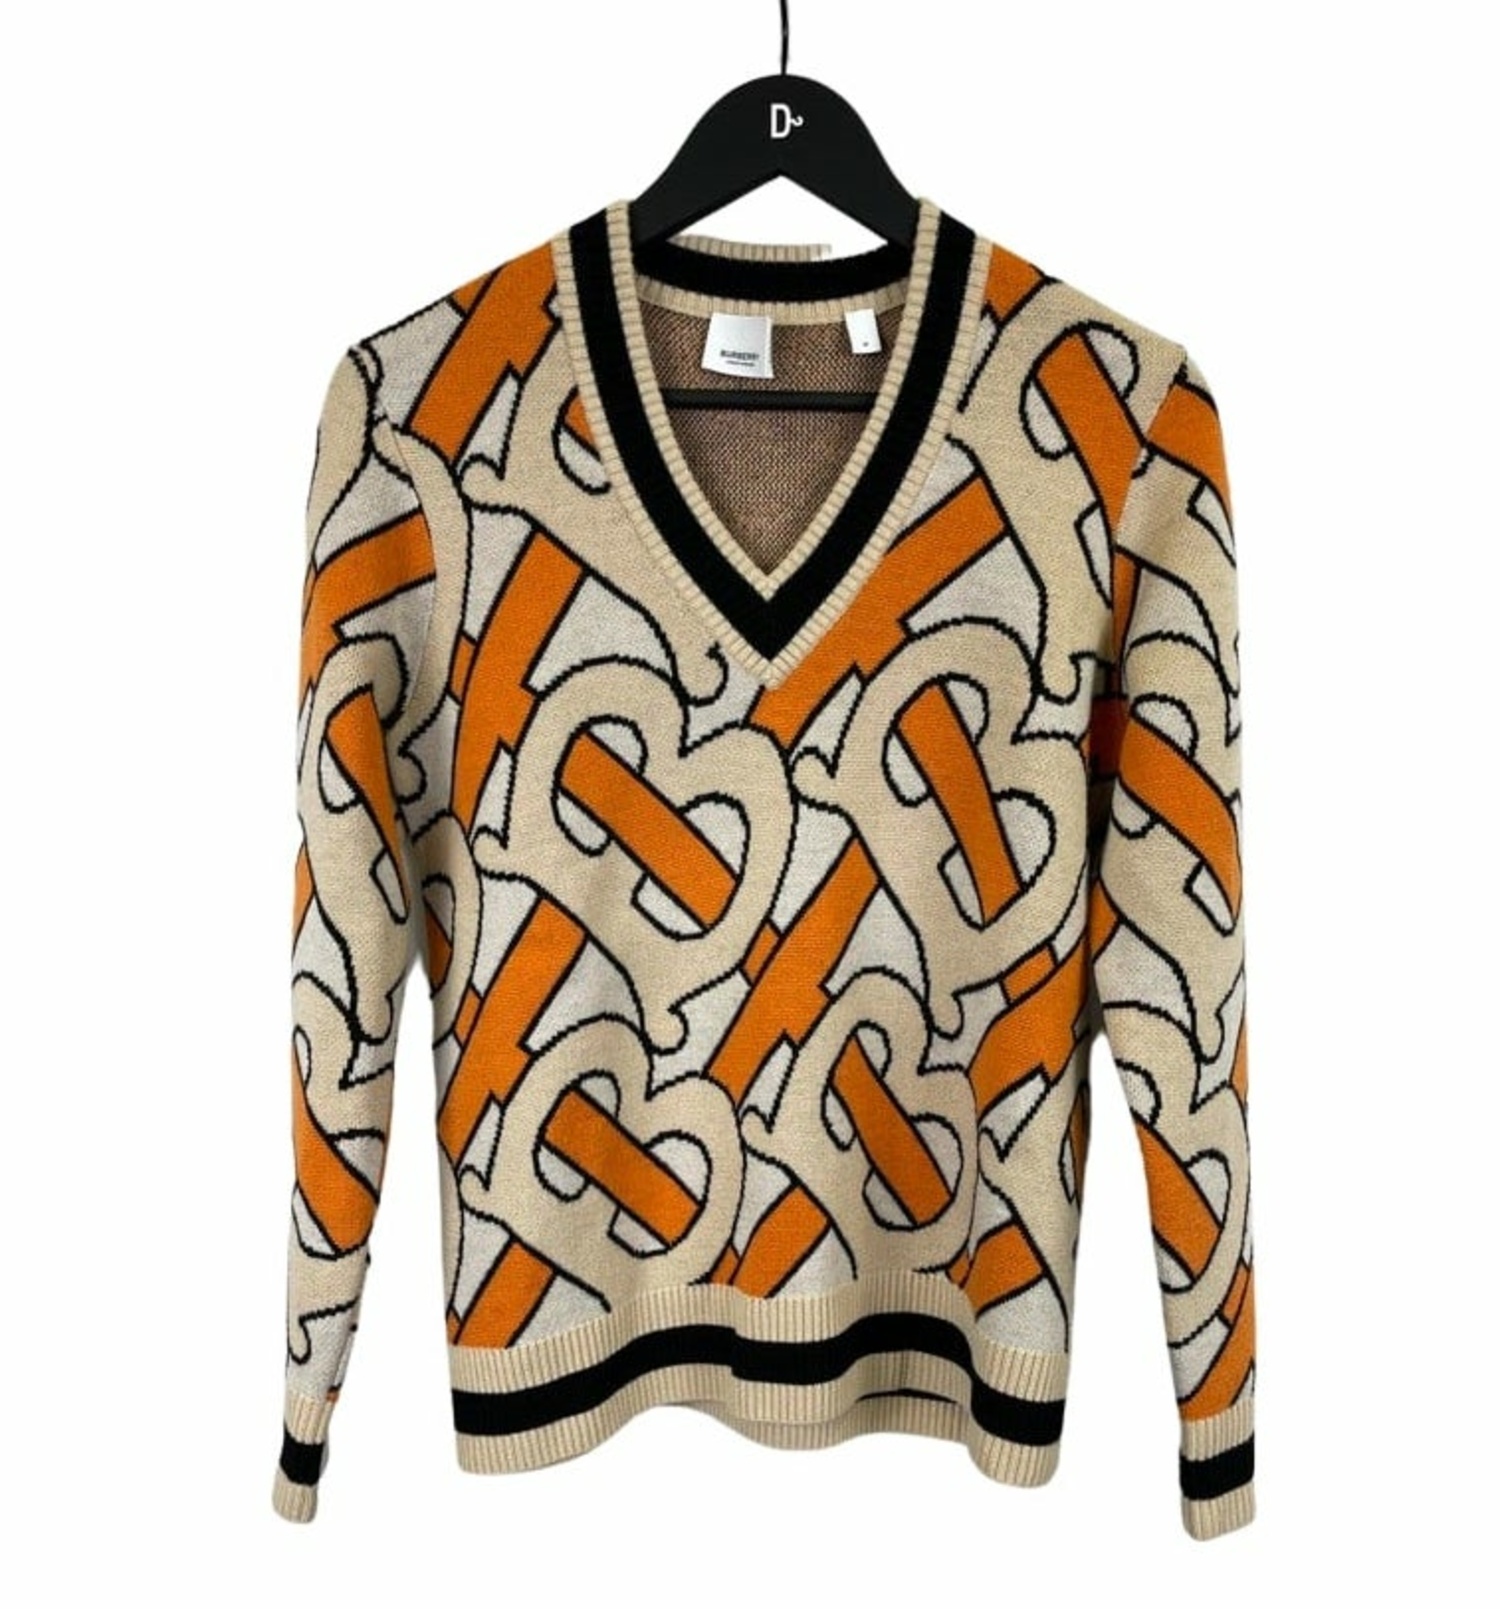 V-neck sweater Burberry - M, buy pre-owned at 330 EUR